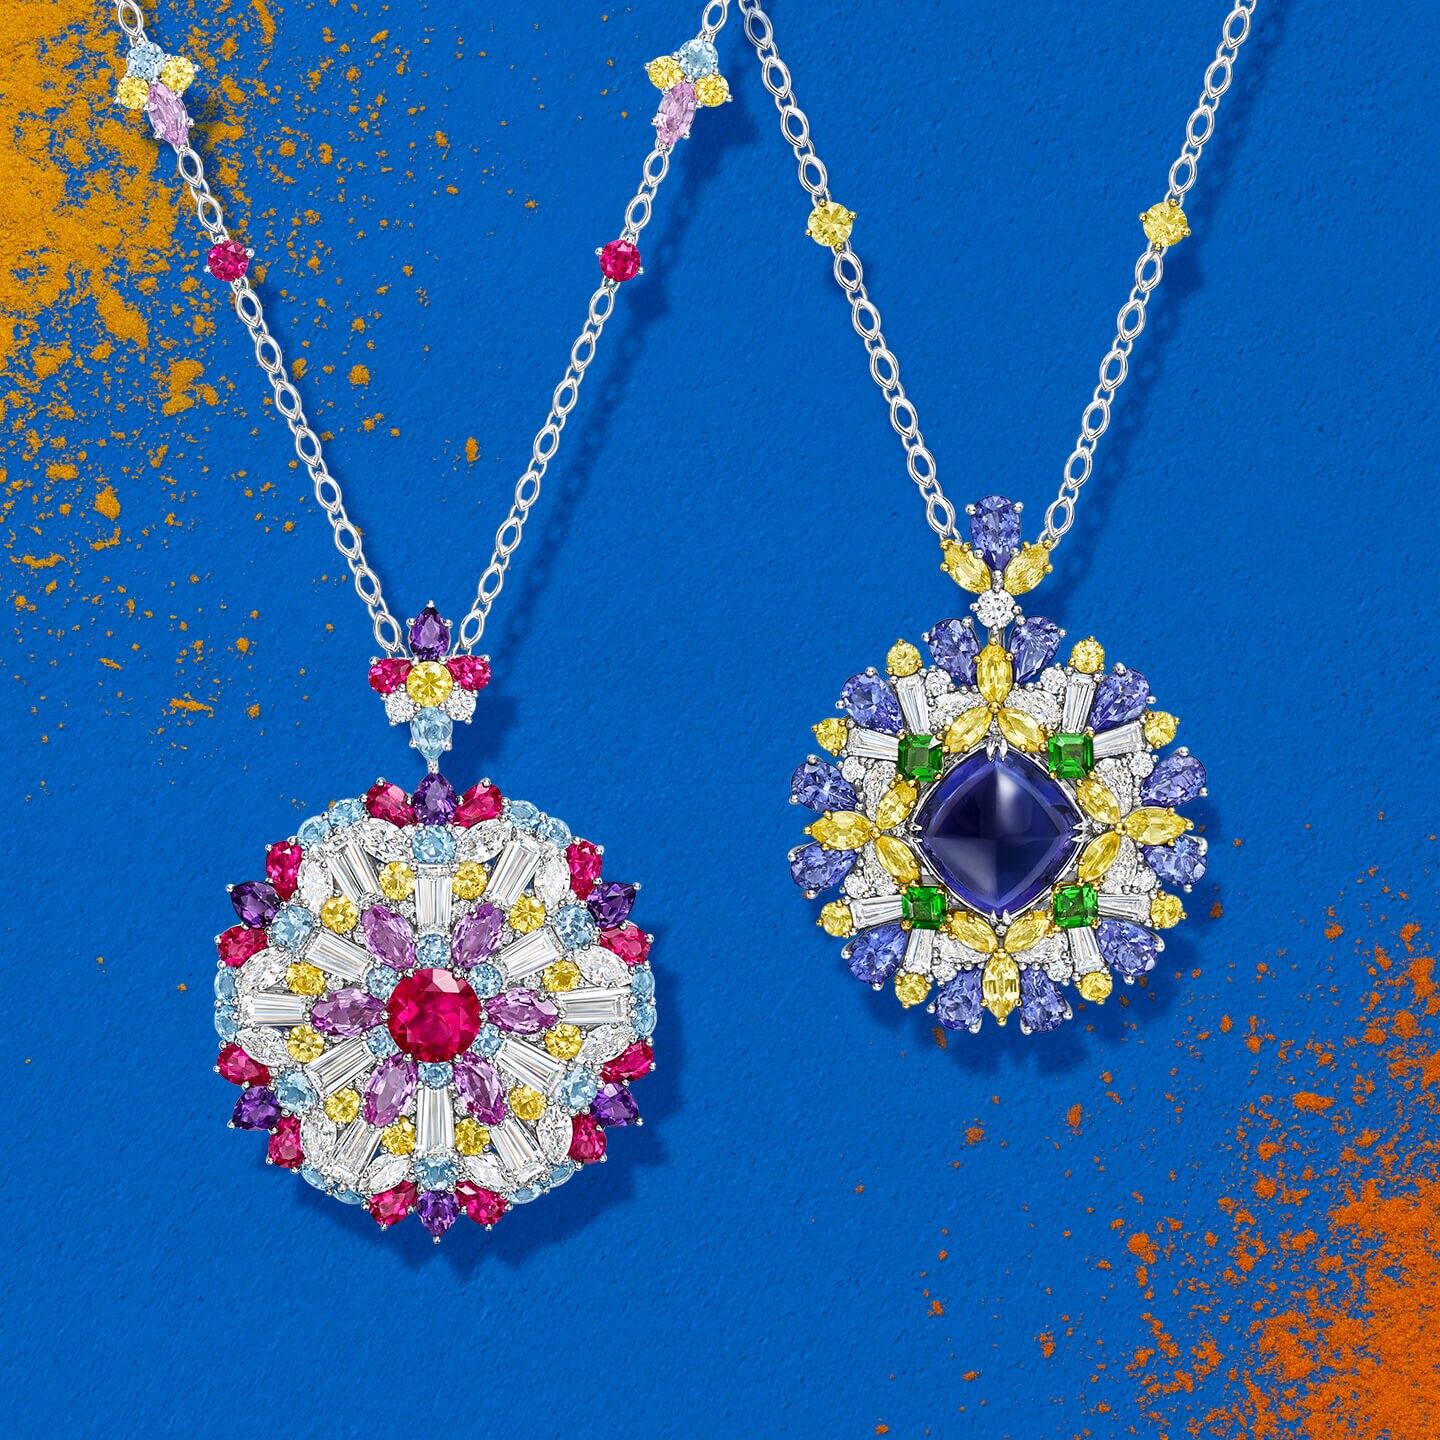 Two Winston Kaleidoscope pendants with colorful and unique gemstones.